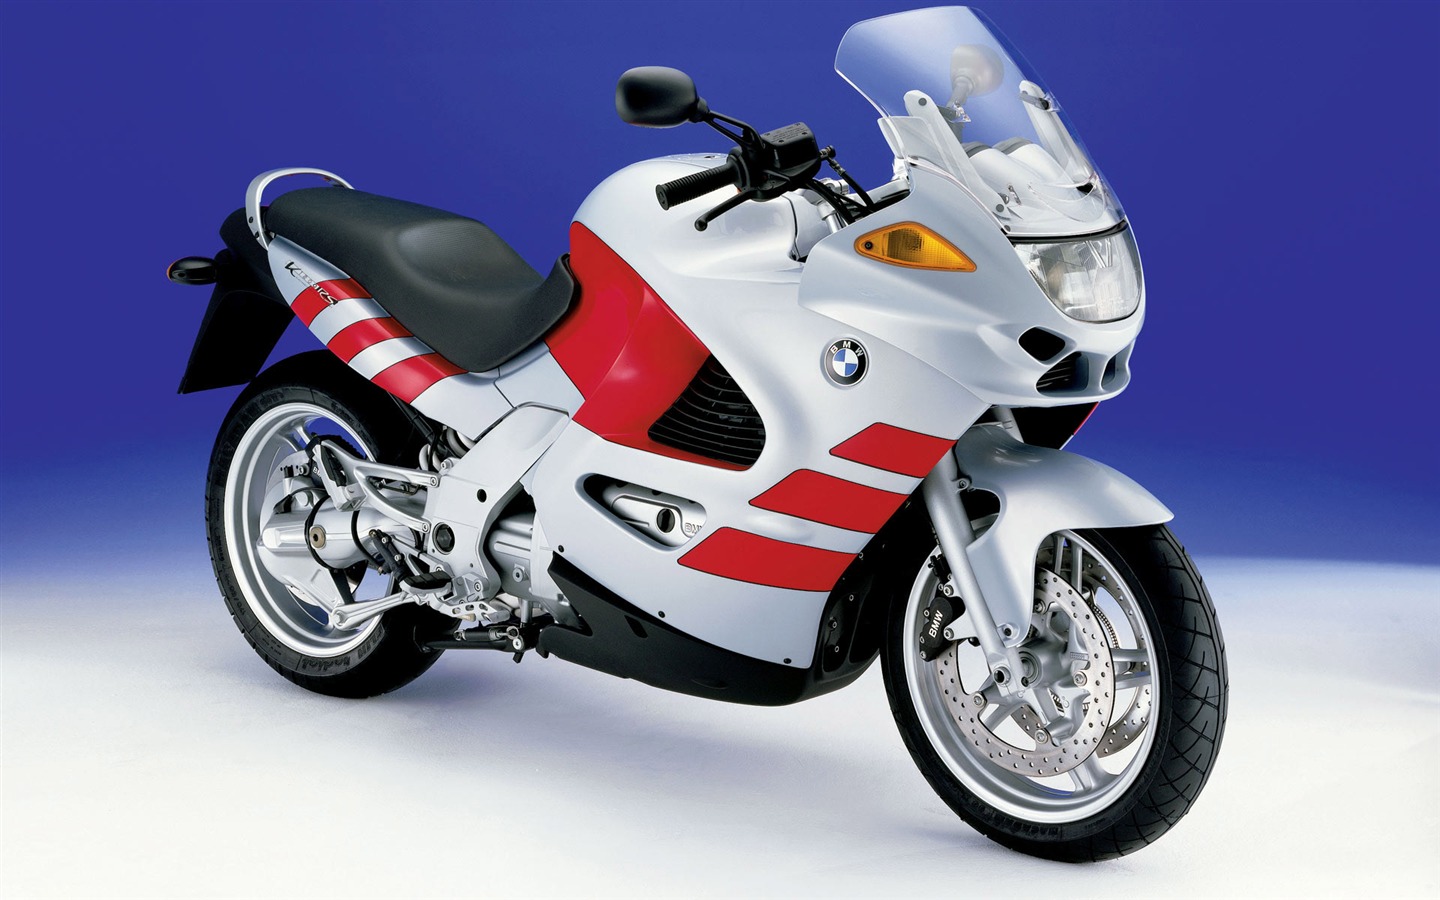 BMW motorcycle wallpapers (1) #1 - 1440x900